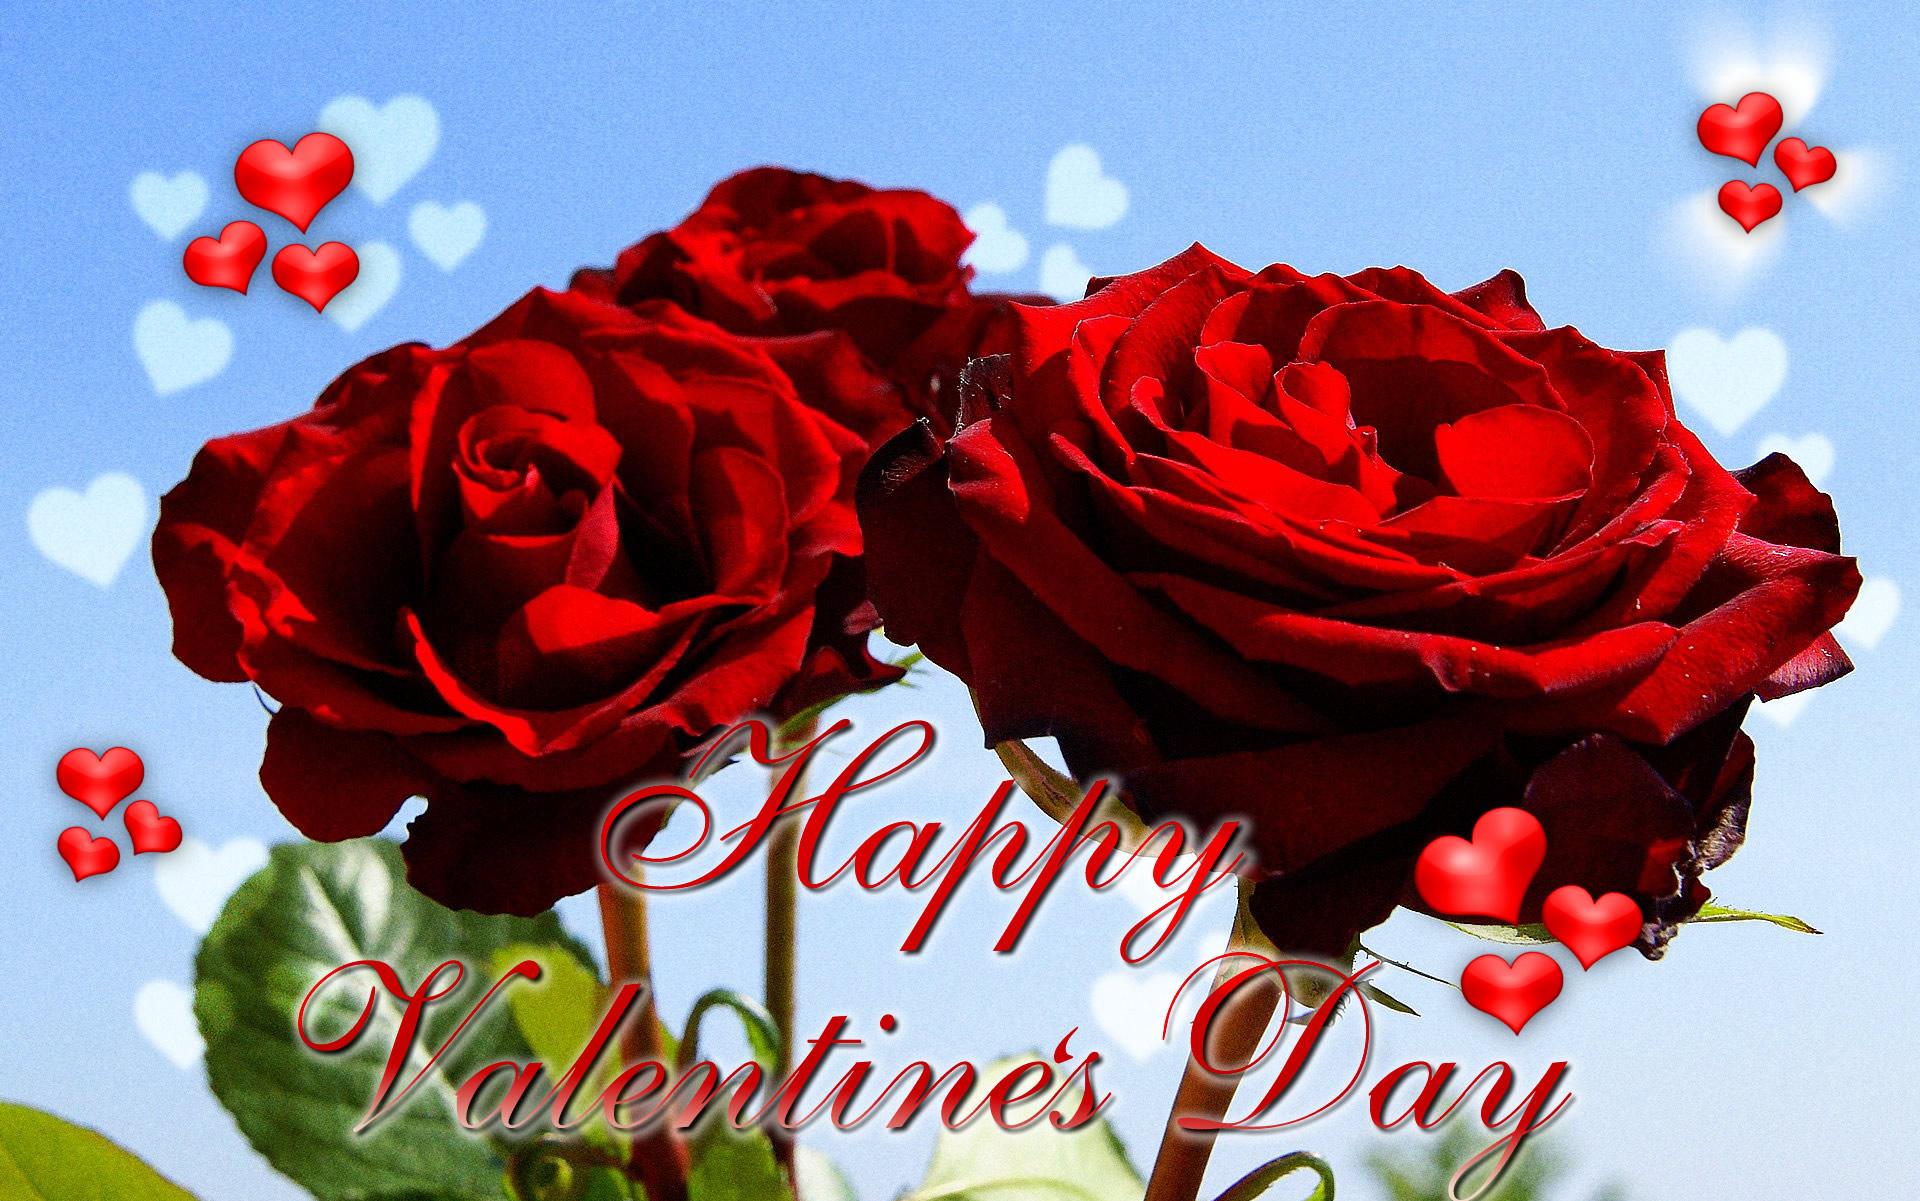 Happy Valentine's Day cards and wallpaper